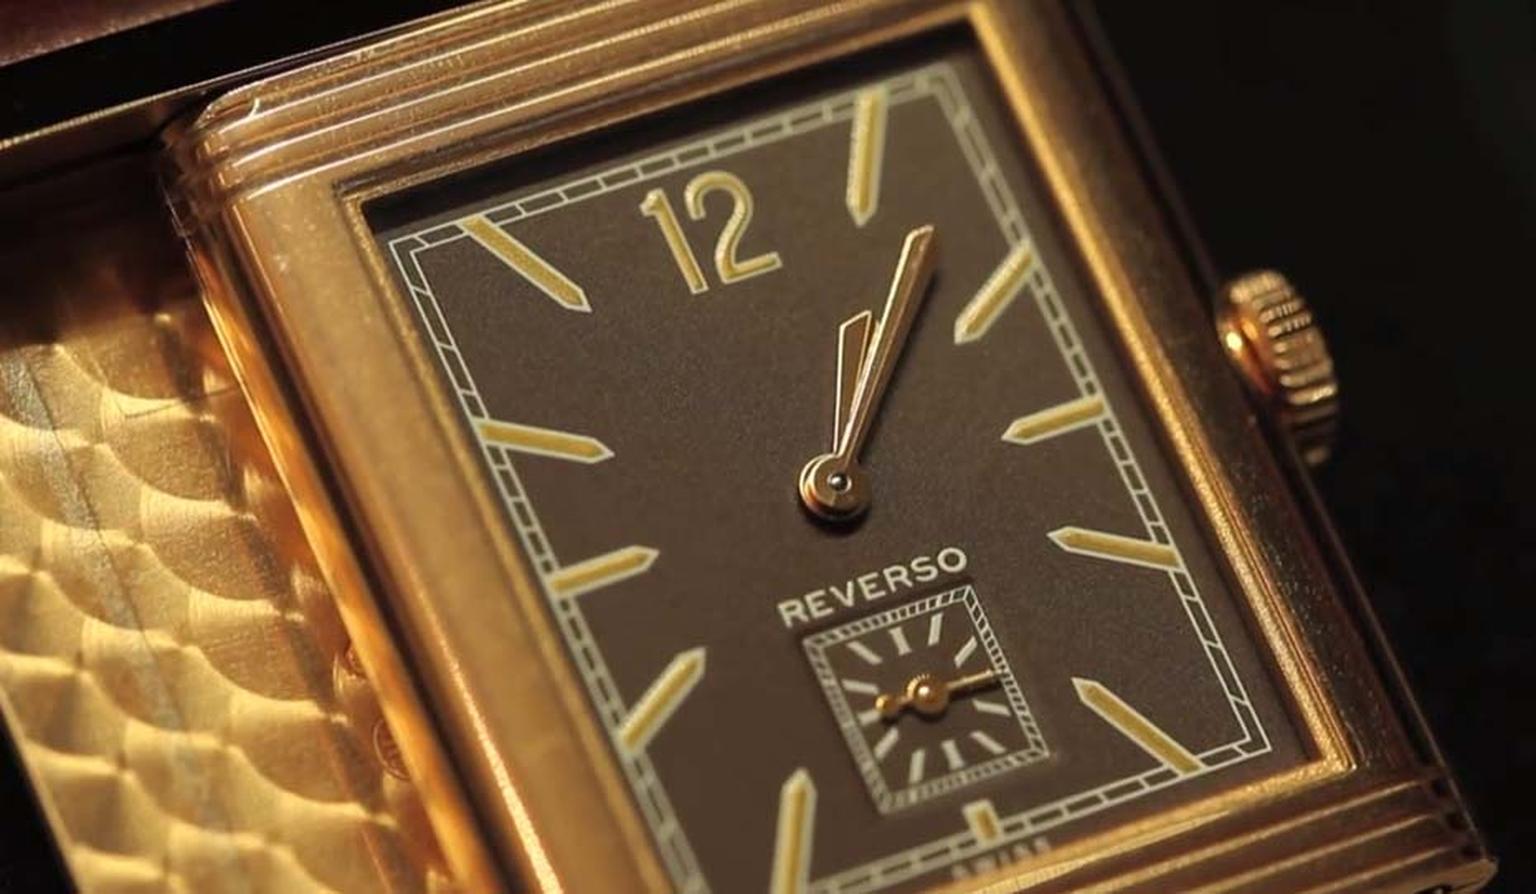 Jaeger-LeCoultre Grande Reverso Ultra-Thin 1931 in pink gold with a chocolate dial